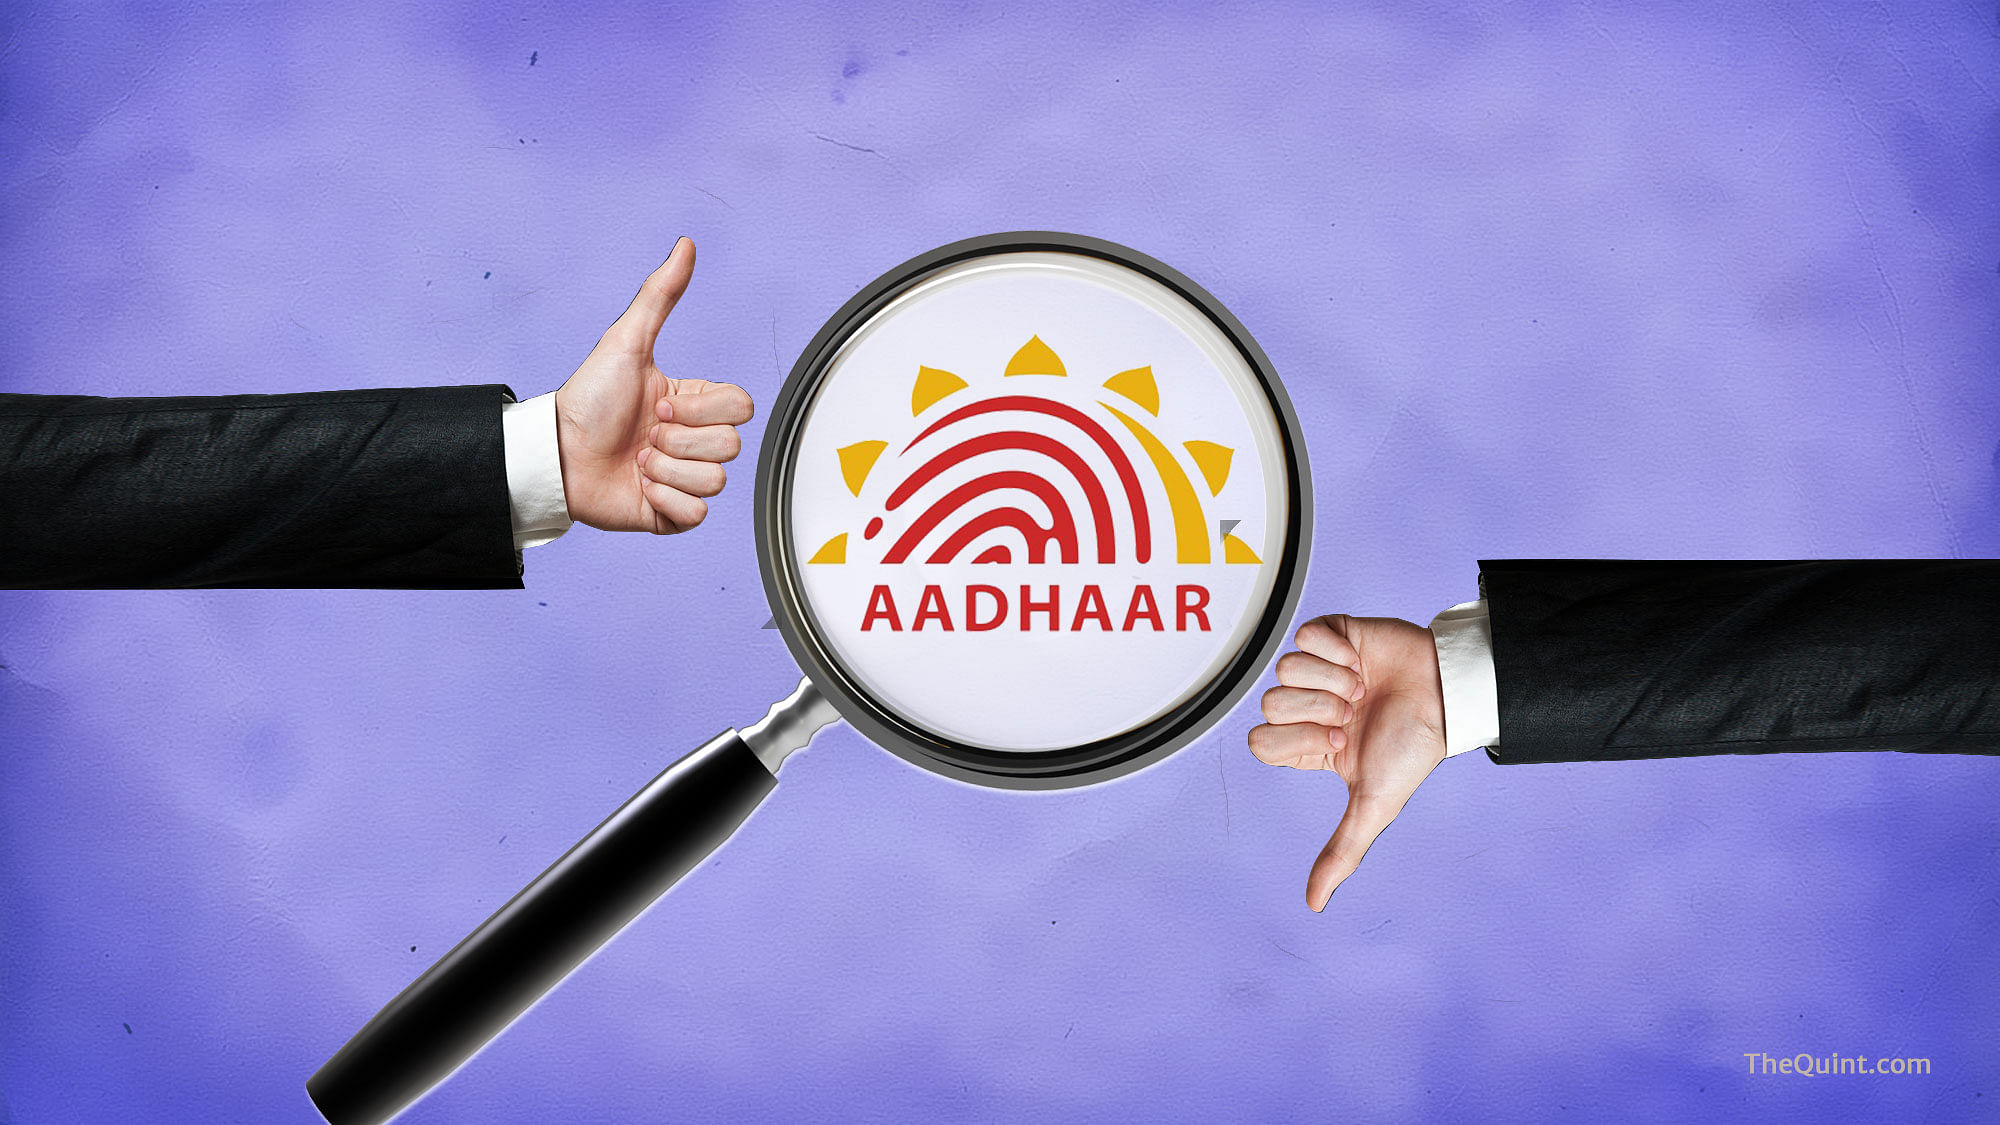 Aadhaar information of over a billion people has been supposedly compromised.